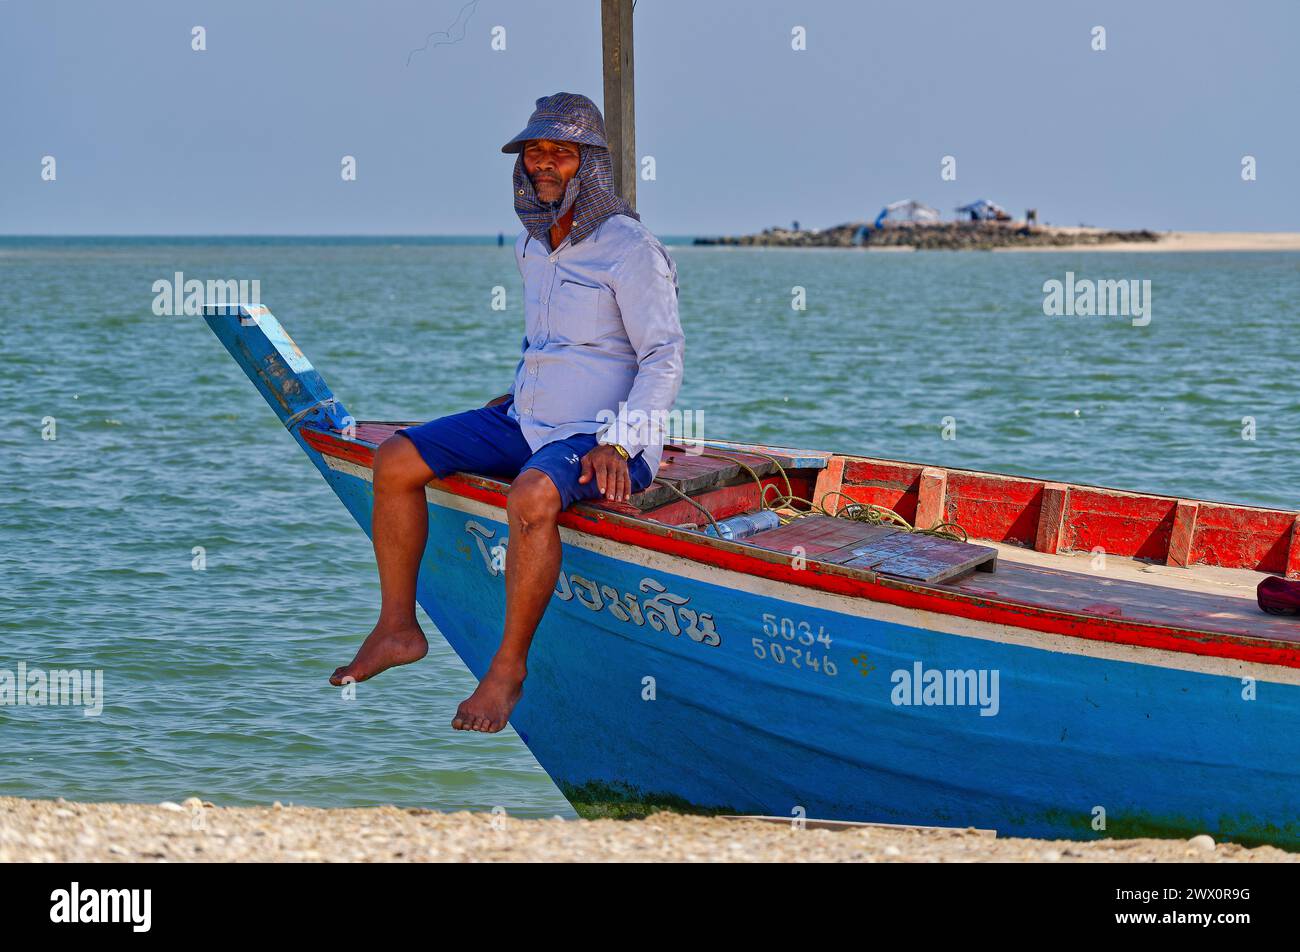 Fisherman resting on blue and red boat landed on a sand spit in the Gulf of Thailand Stock Photo